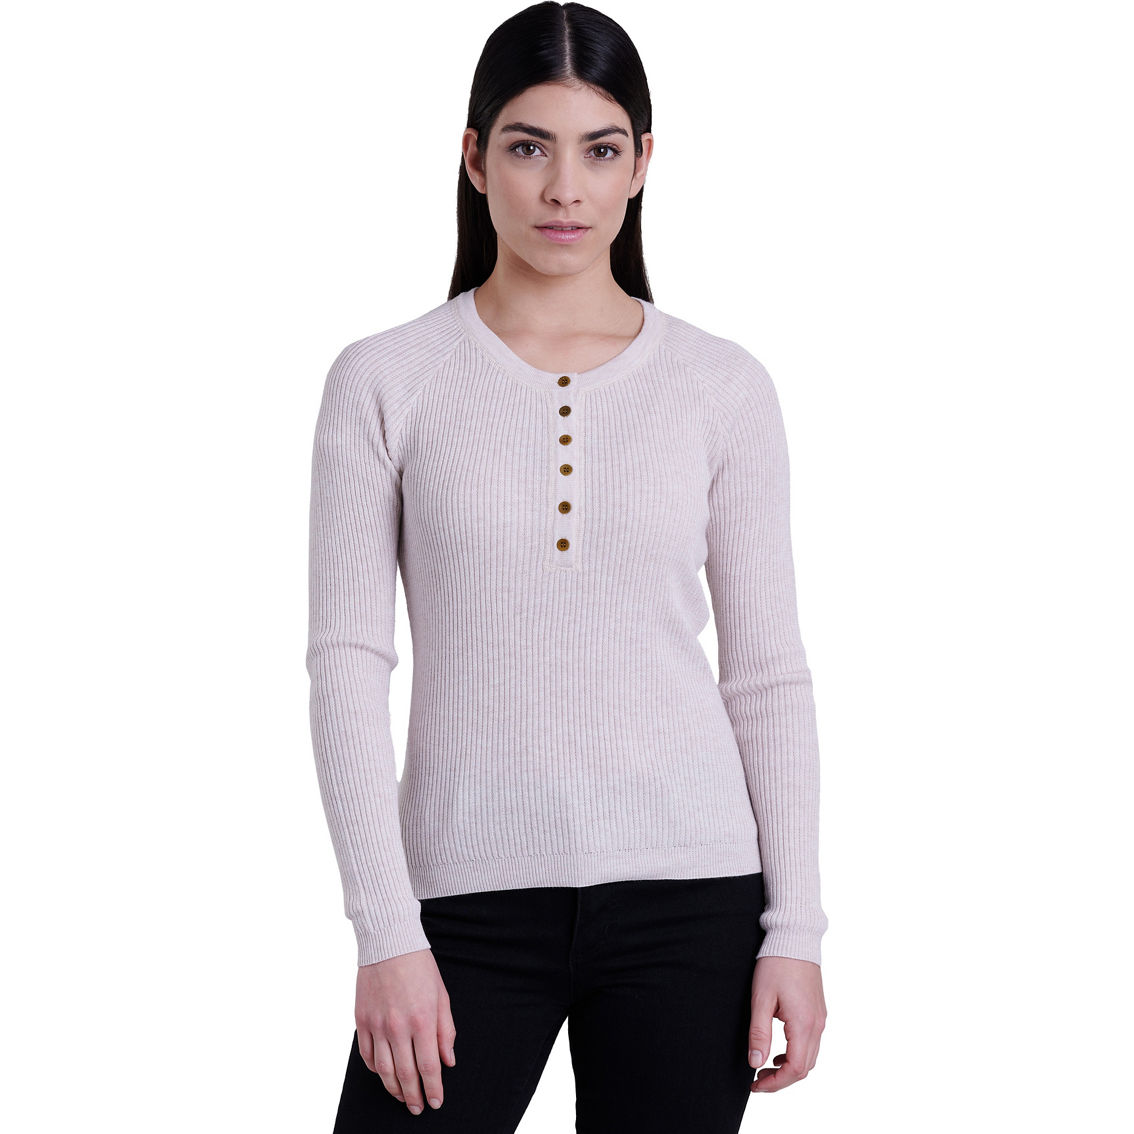 Kuhl Gemma Sweater, Sweaters, Clothing & Accessories